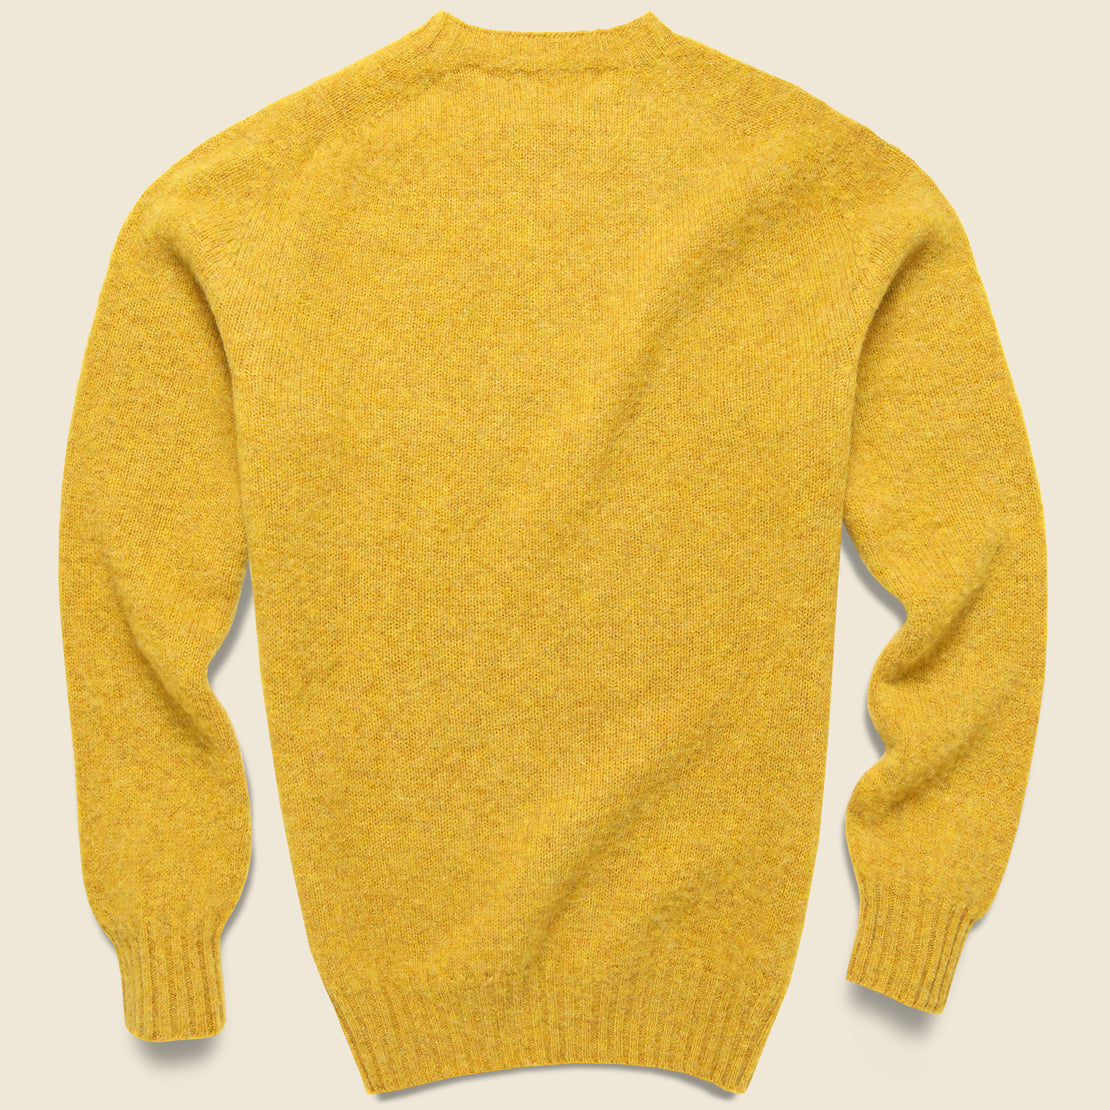 Birth of the Cool Sweater - Butterscotch - Howlin - STAG Provisions - Tops - Sweater